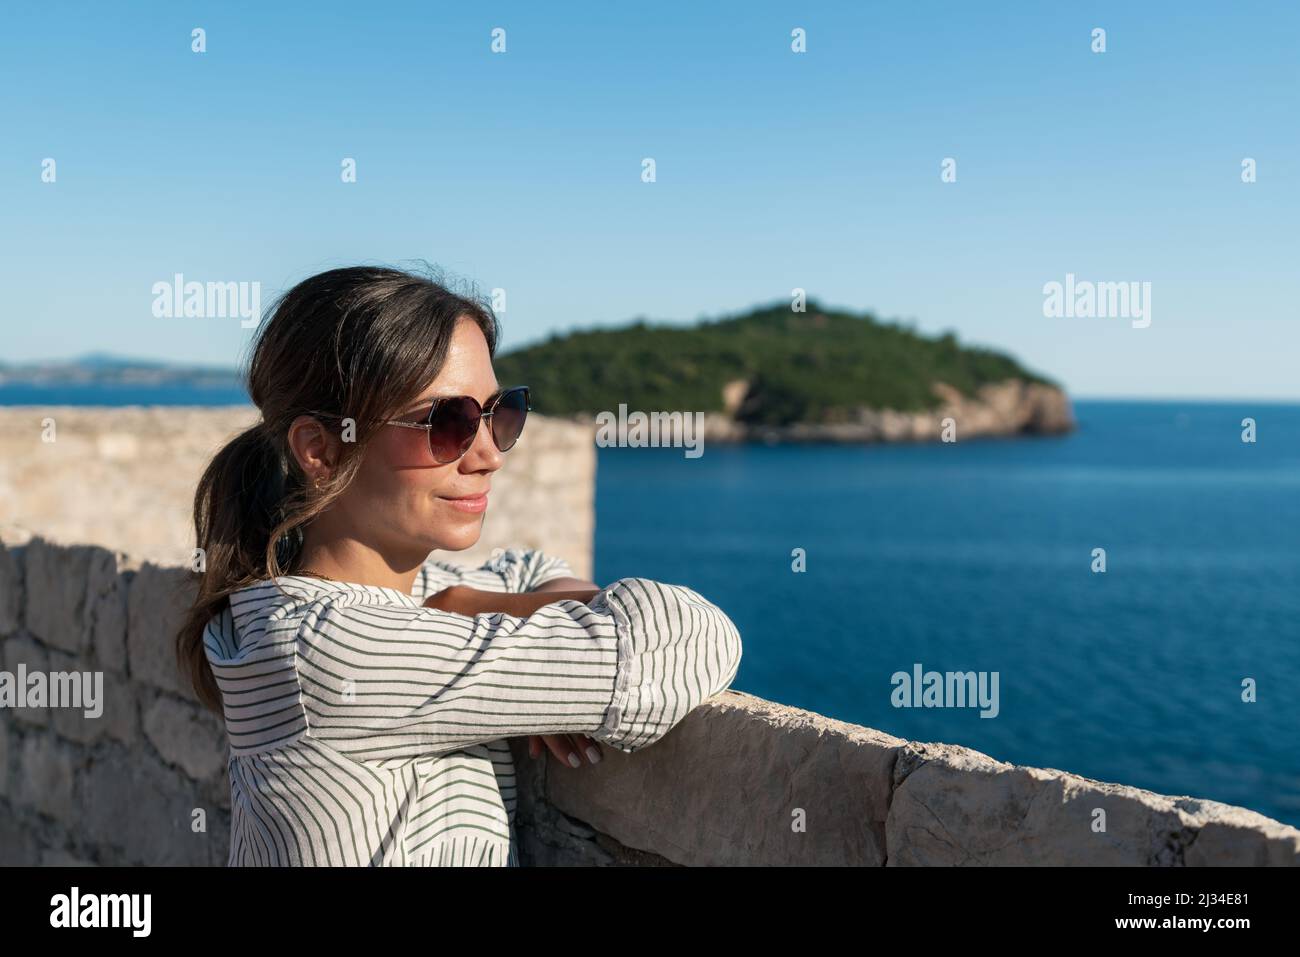 Woman looks out to sea from the city walls of the old town in Dubrovnik, Dalmatia, Croatia. Stock Photo